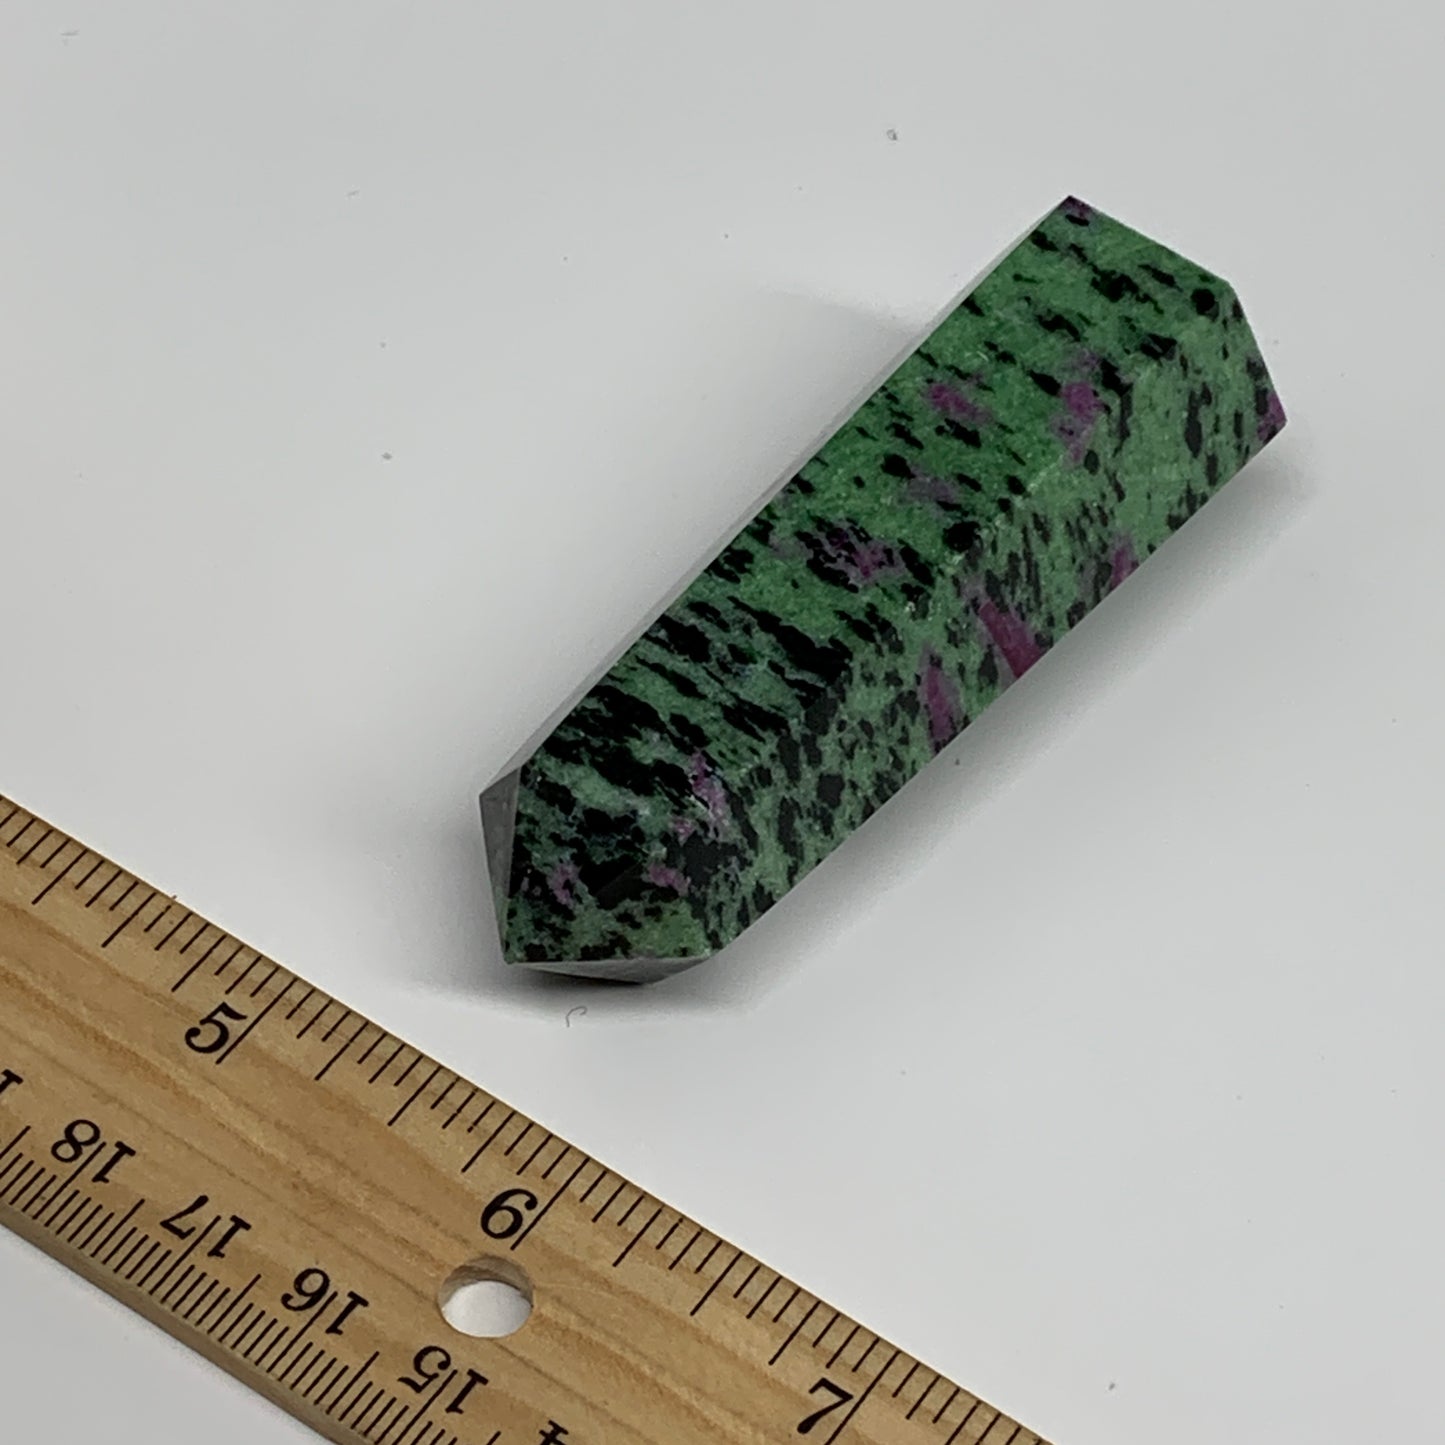 88.4g, 2.9"x0.9", Natural Ruby Zoisite Tower Point Obelisk @India, B31424